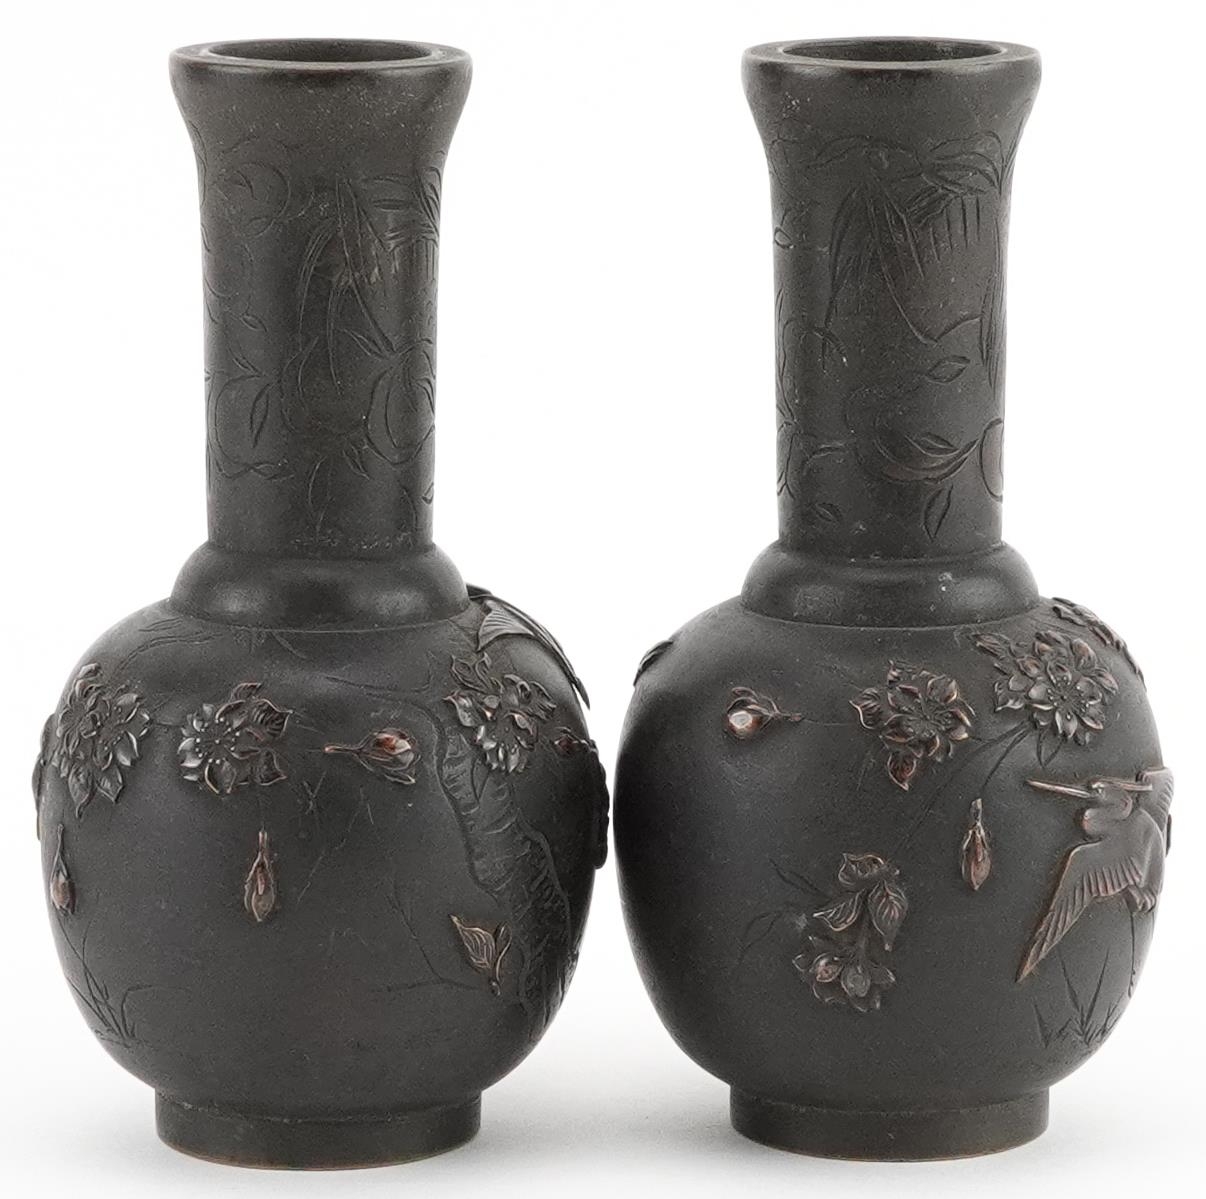 Pair of Japanese bronze vases cast in relief with birds of paradise amongst flowers, each 12cm high - Image 4 of 6